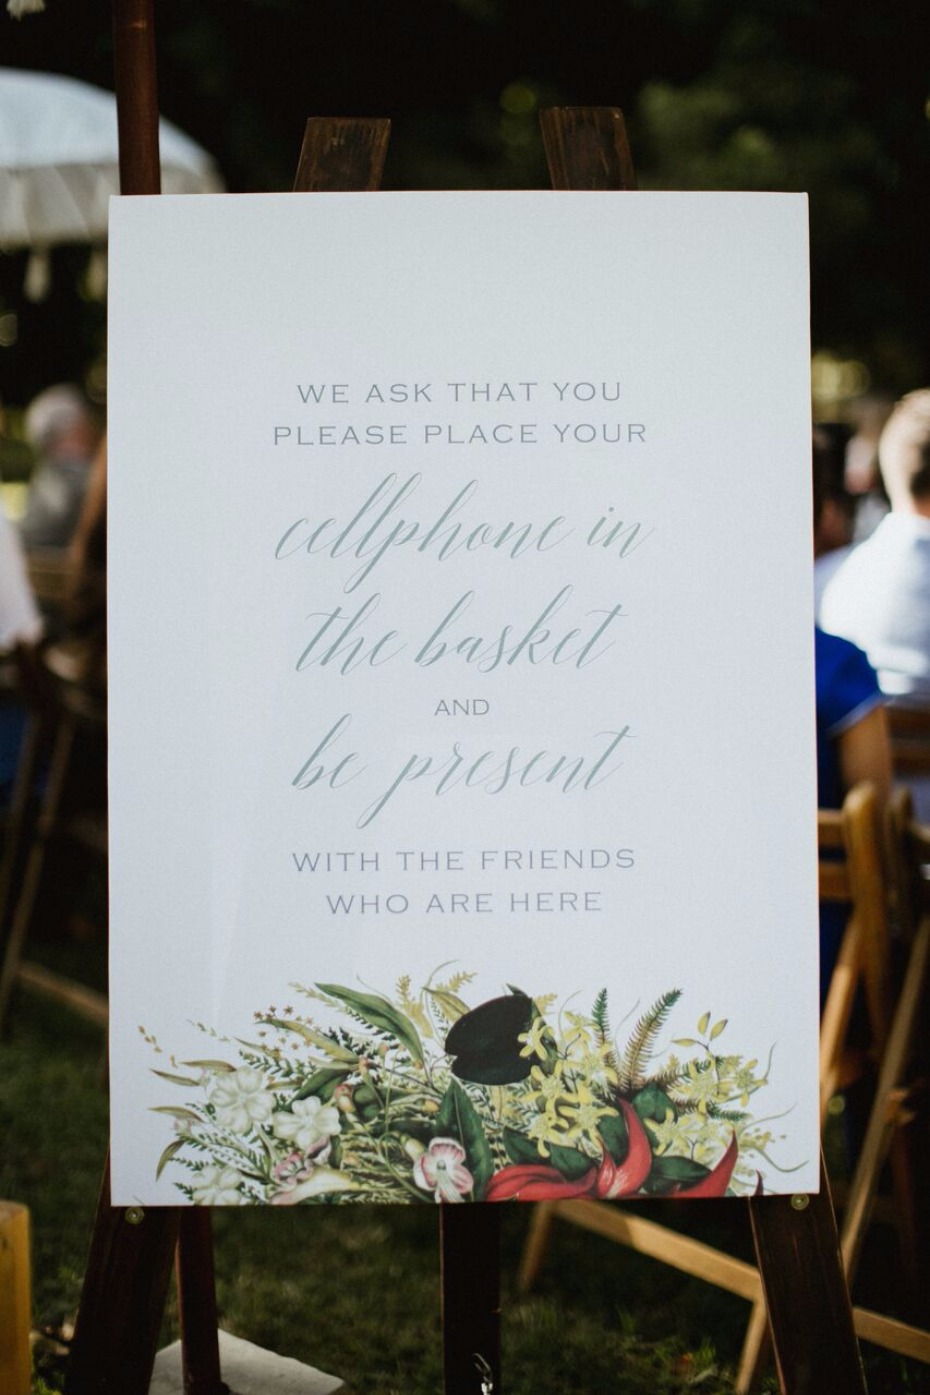 Unplugged ceremony sign